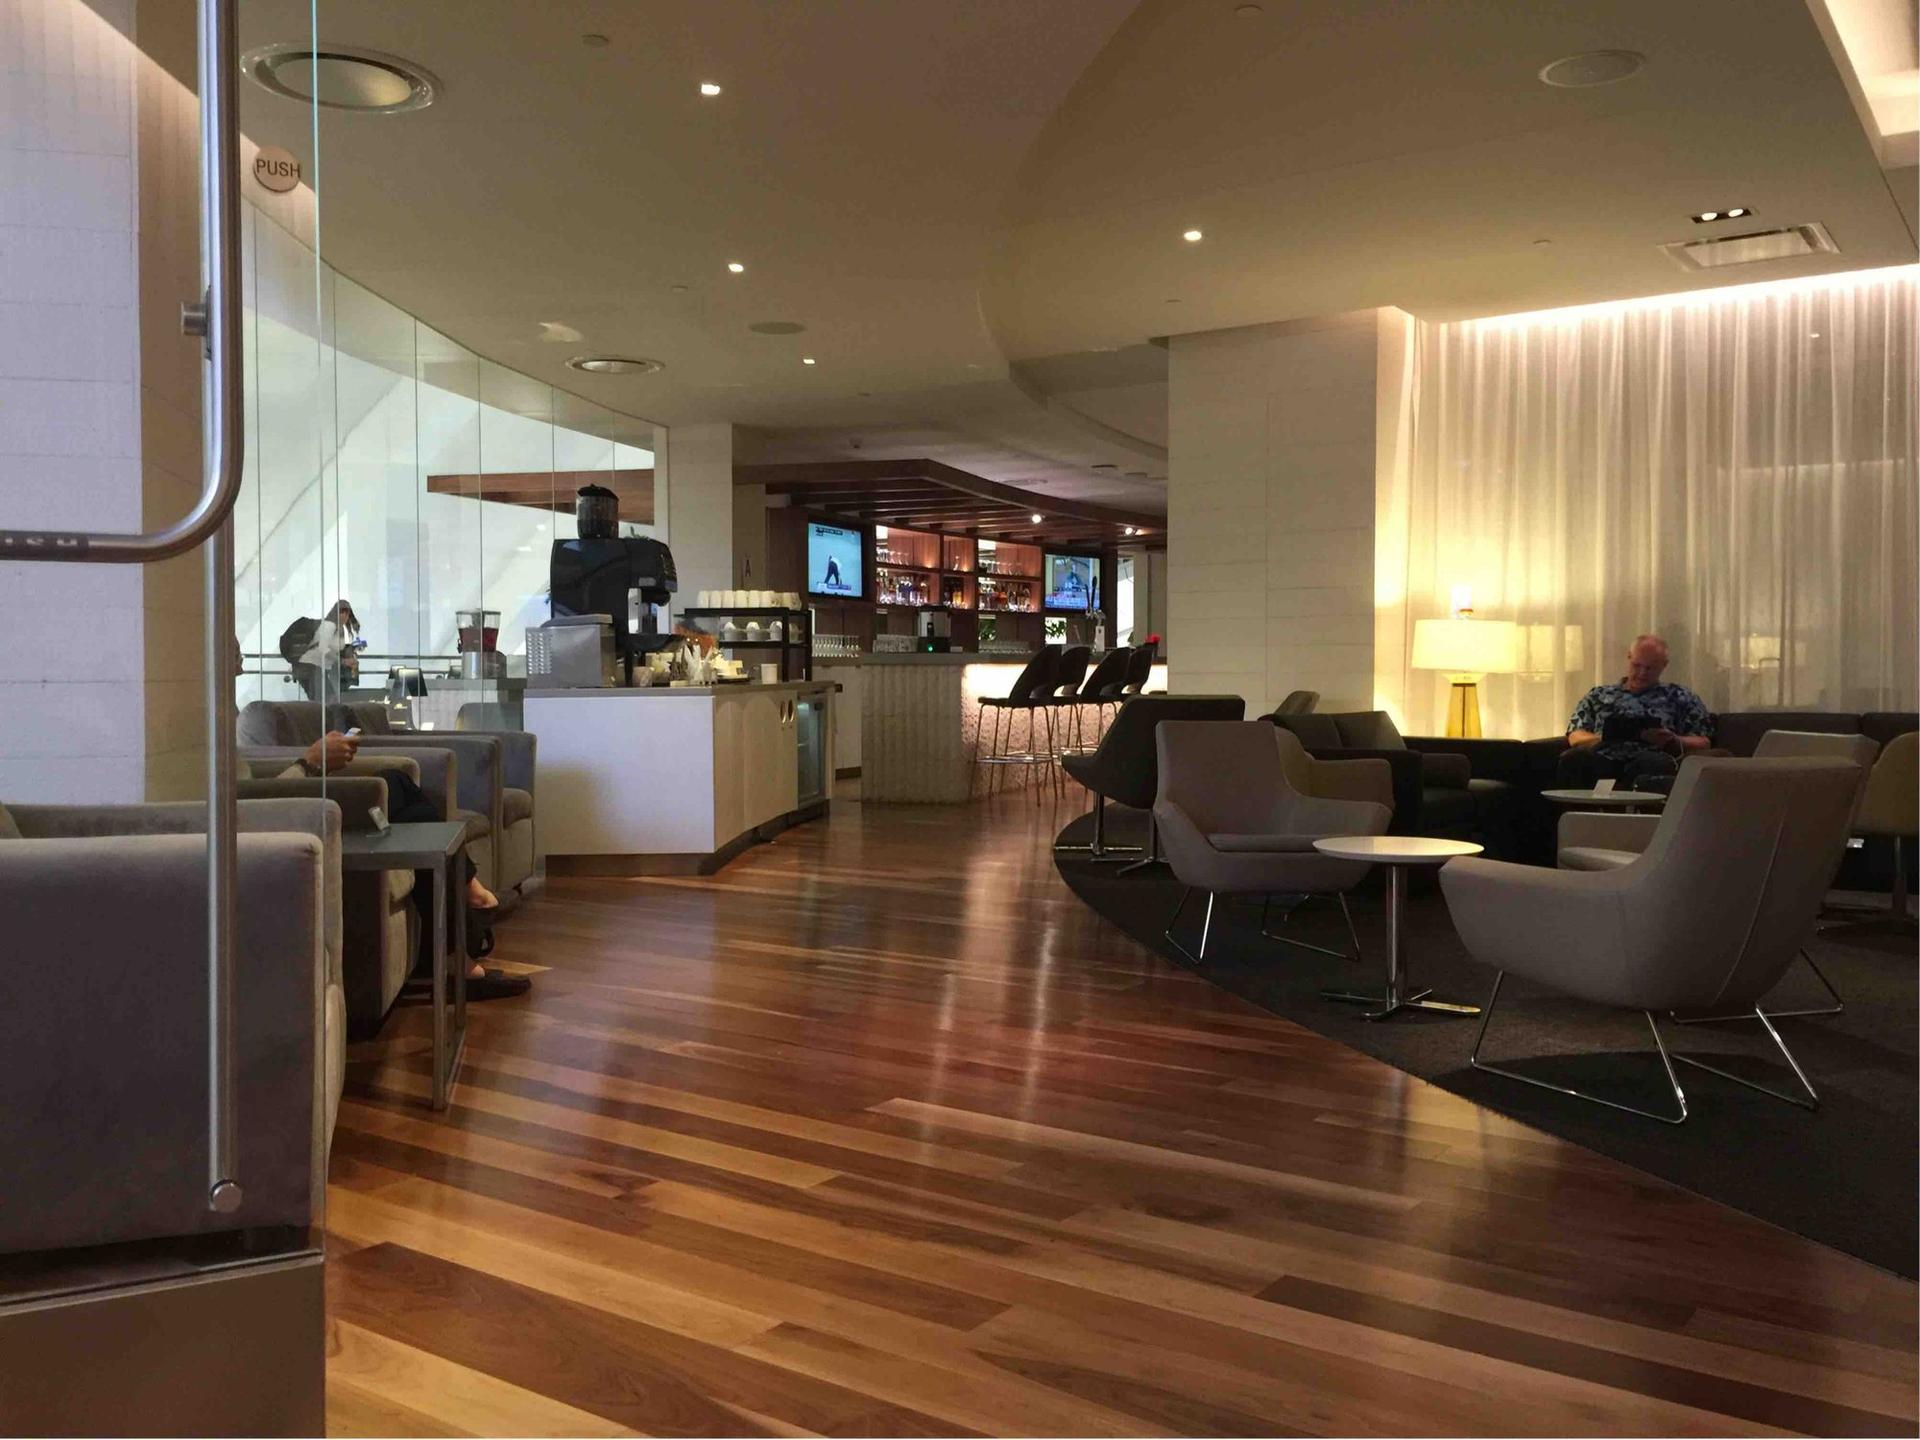 Star Alliance Business Class Lounge image 26 of 72